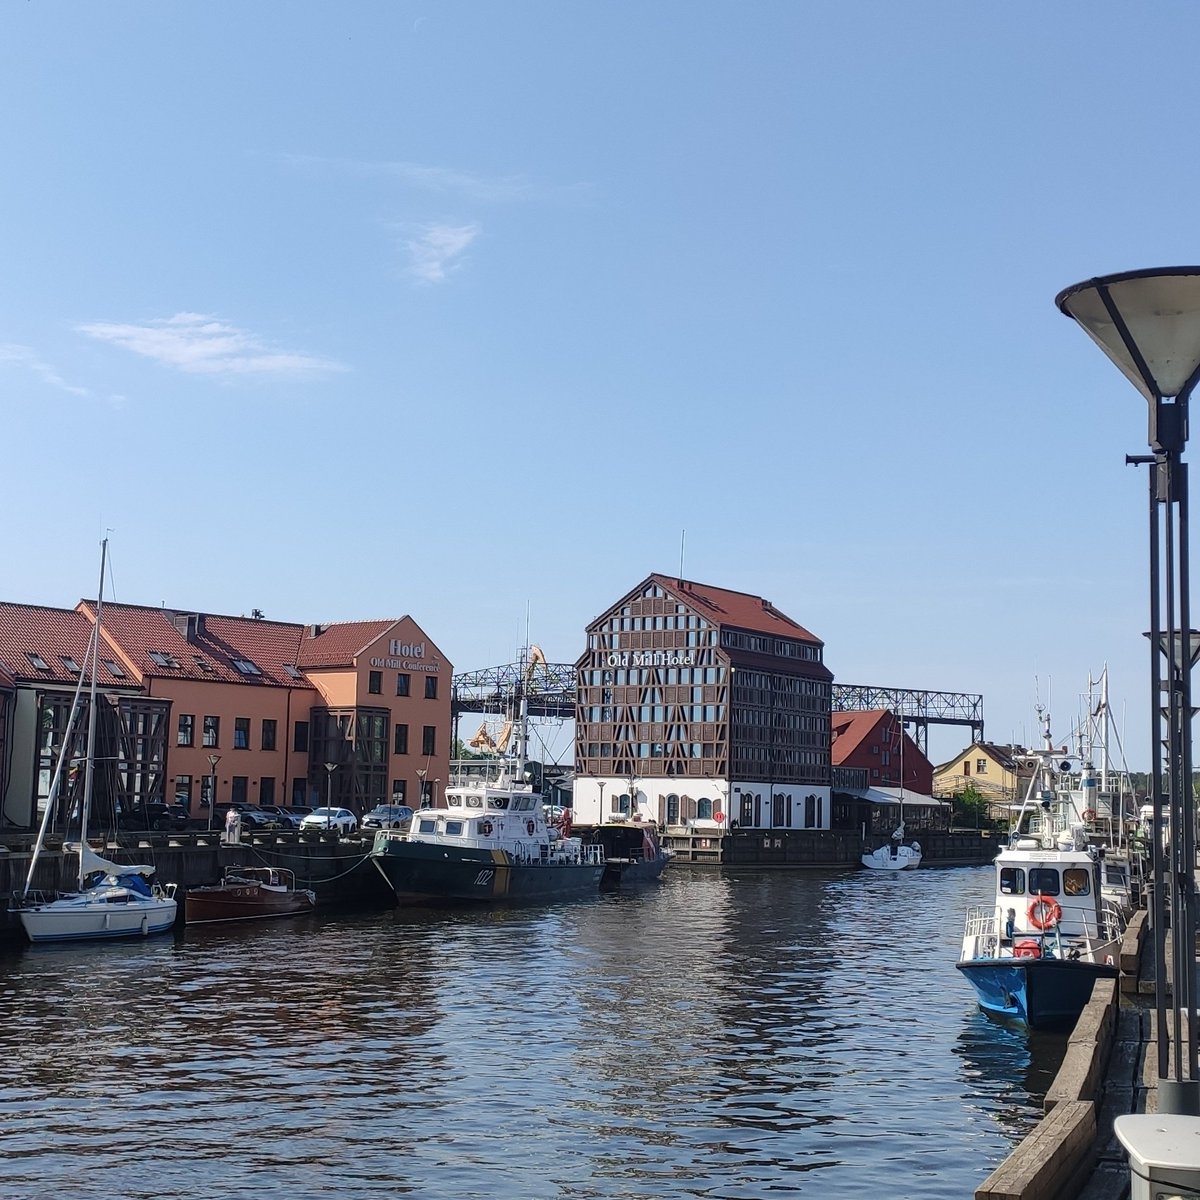 Klaipeda - 7th stop

Finally arrived at the baltic sea coast, in Klaipeda. A lot of the city has been destroyed in the 2 wars so the city has an odd mix of historical, soviet and modern buildings. 

#Klaipeda #BalticSea #Memel #Lithuania